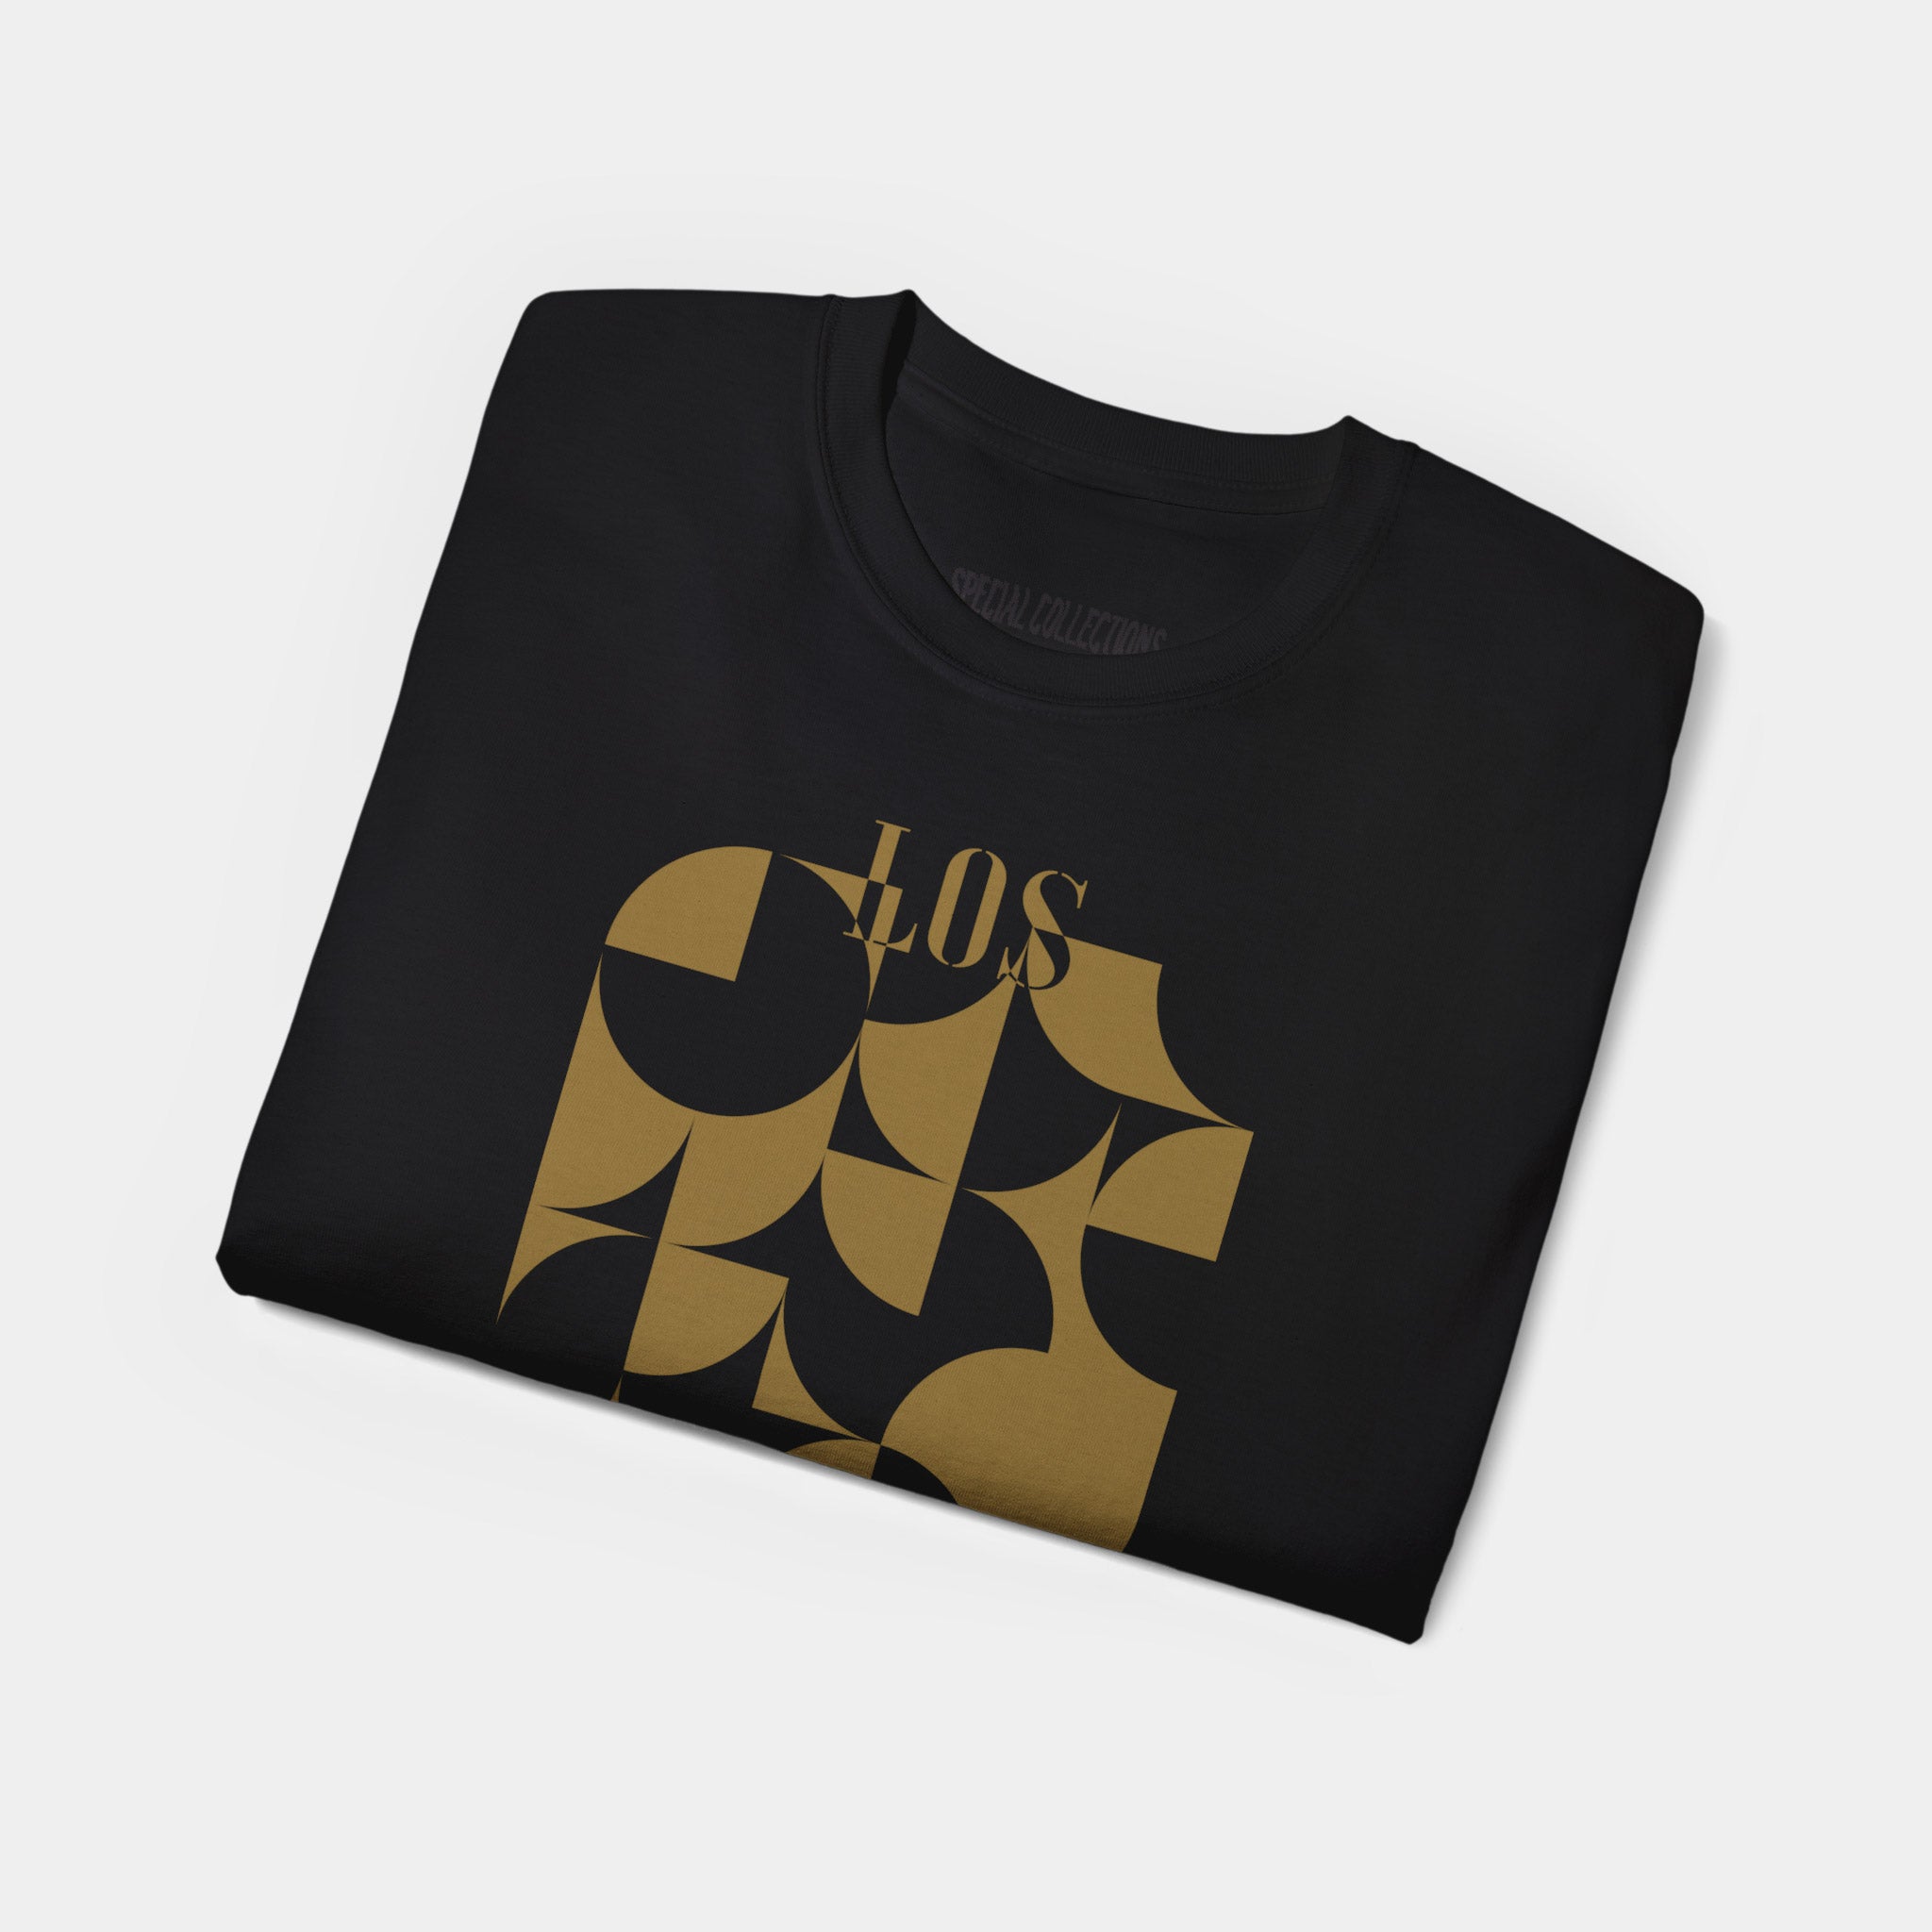 This Is Los Angeles (Wave 1A, LAFC) T-shirt